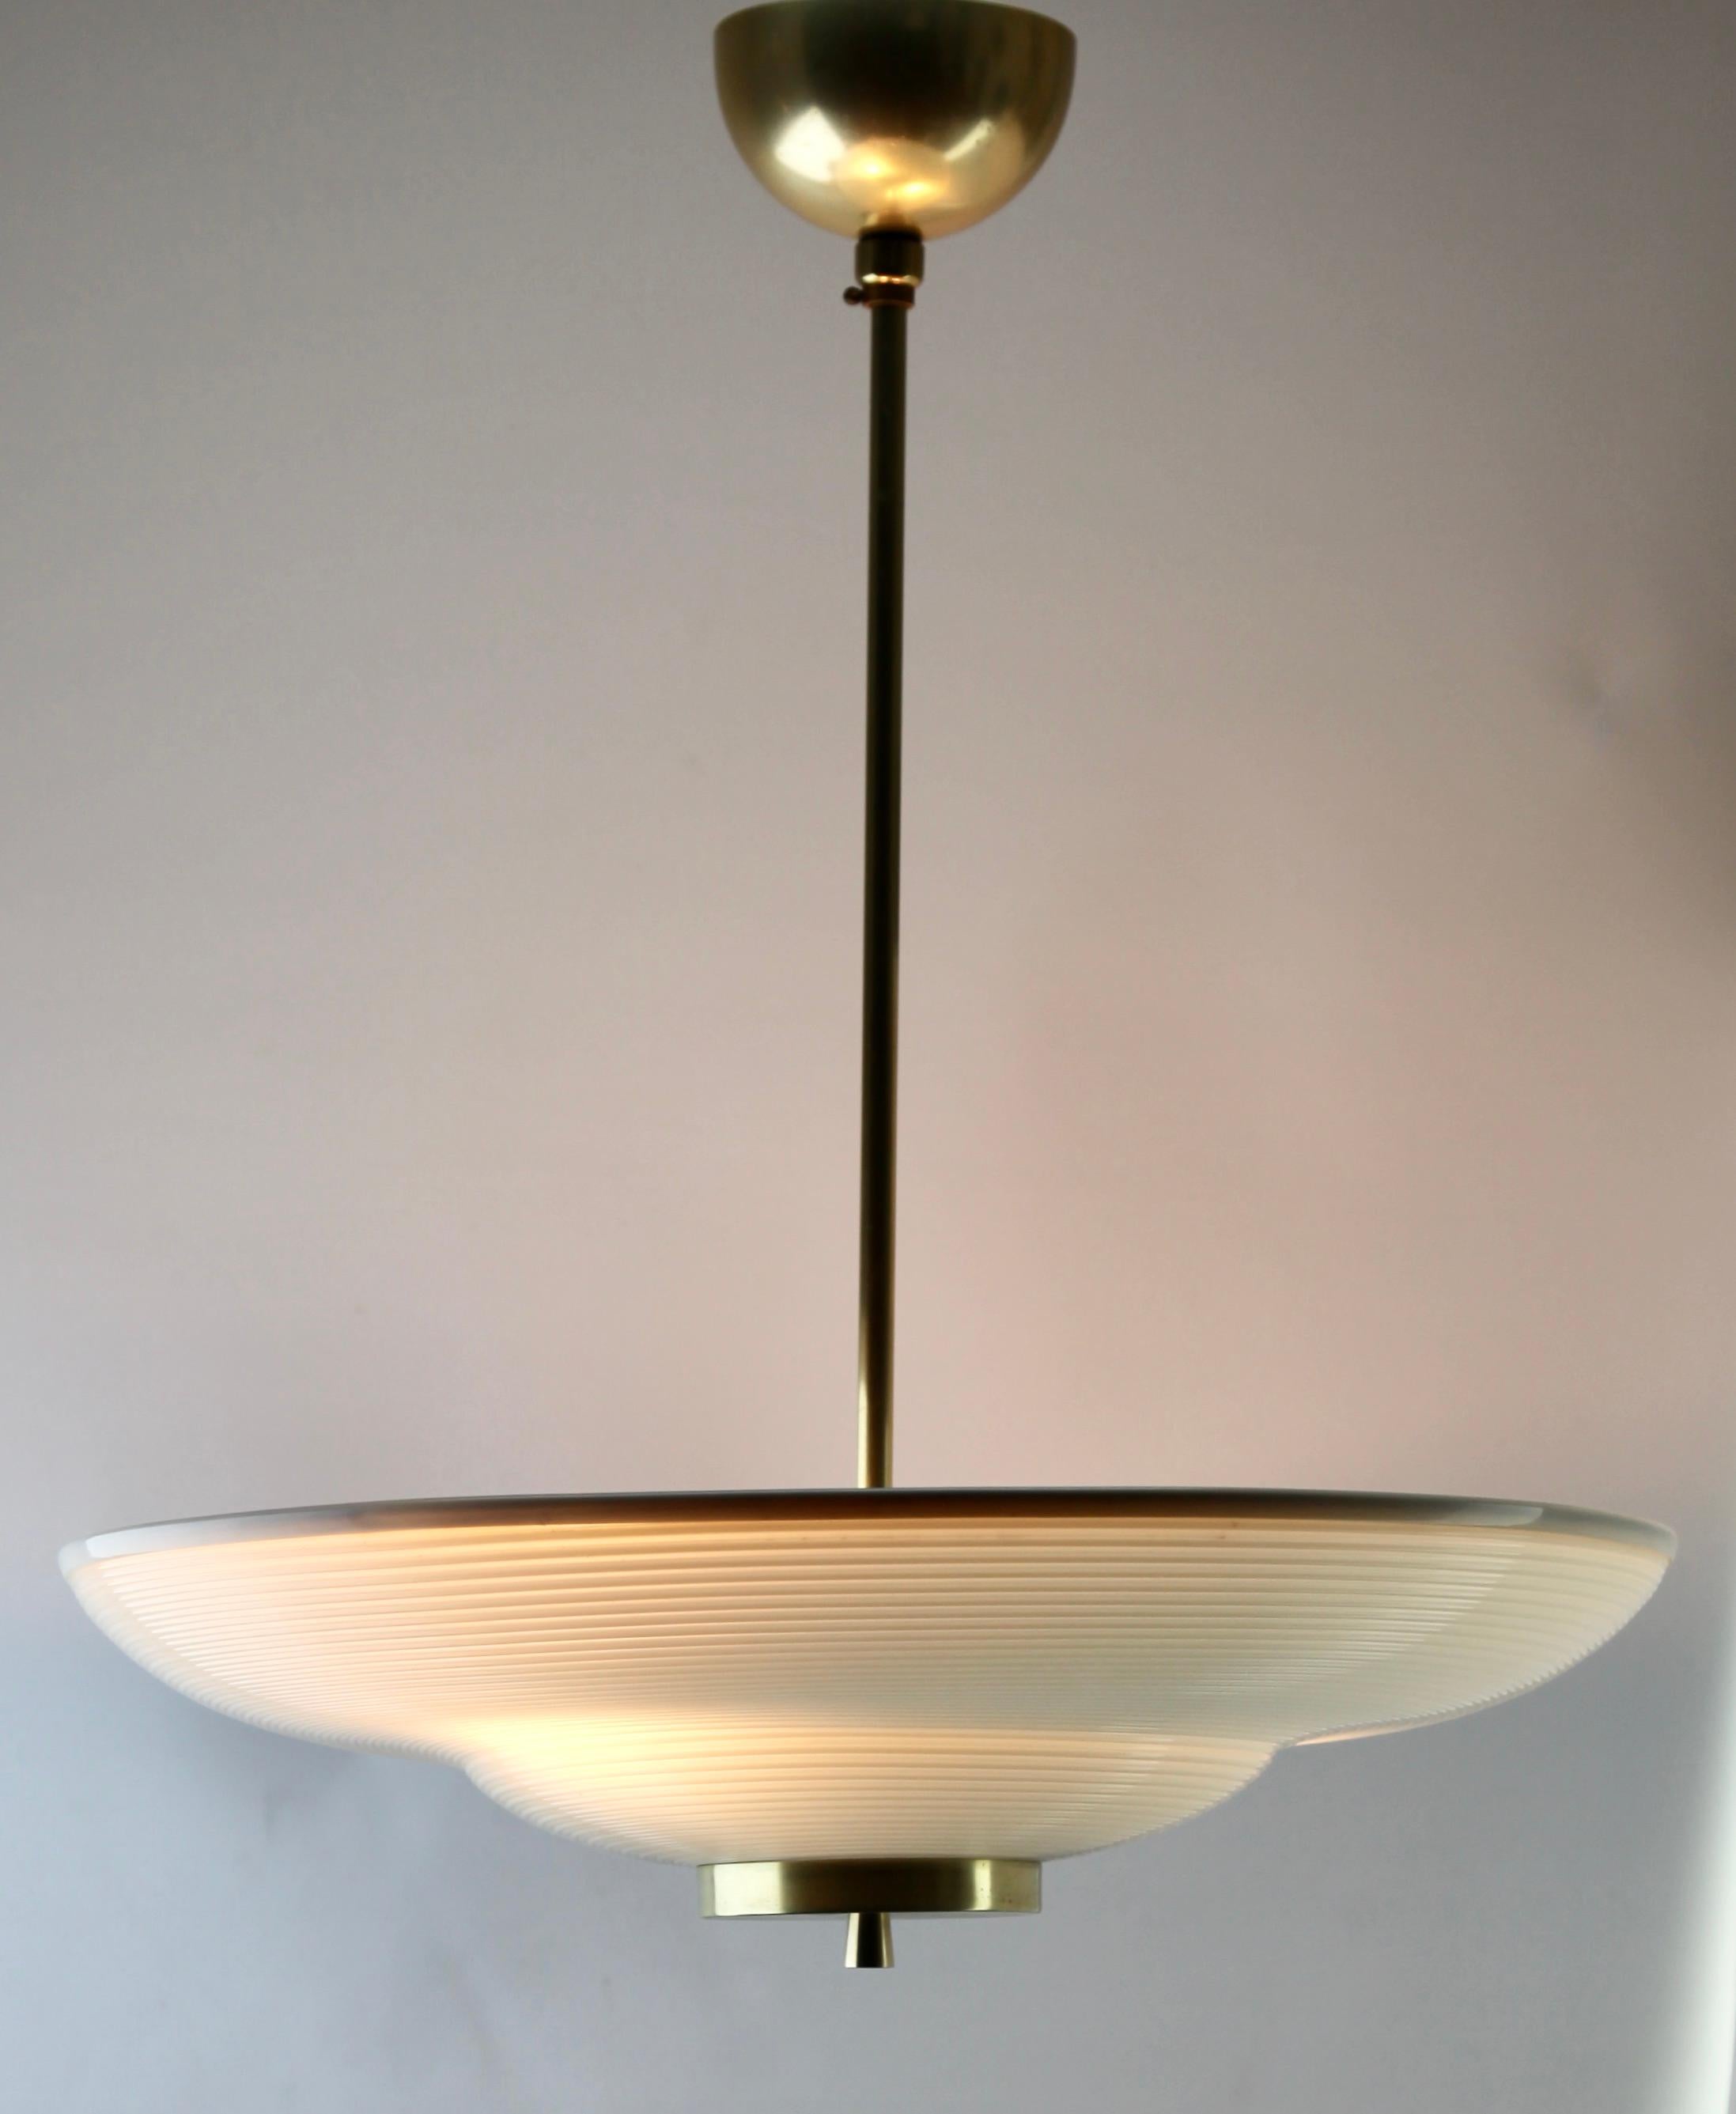 Hand-Crafted Midcentury Scandinavian Pendant Light, with Acrylic Optical Shade